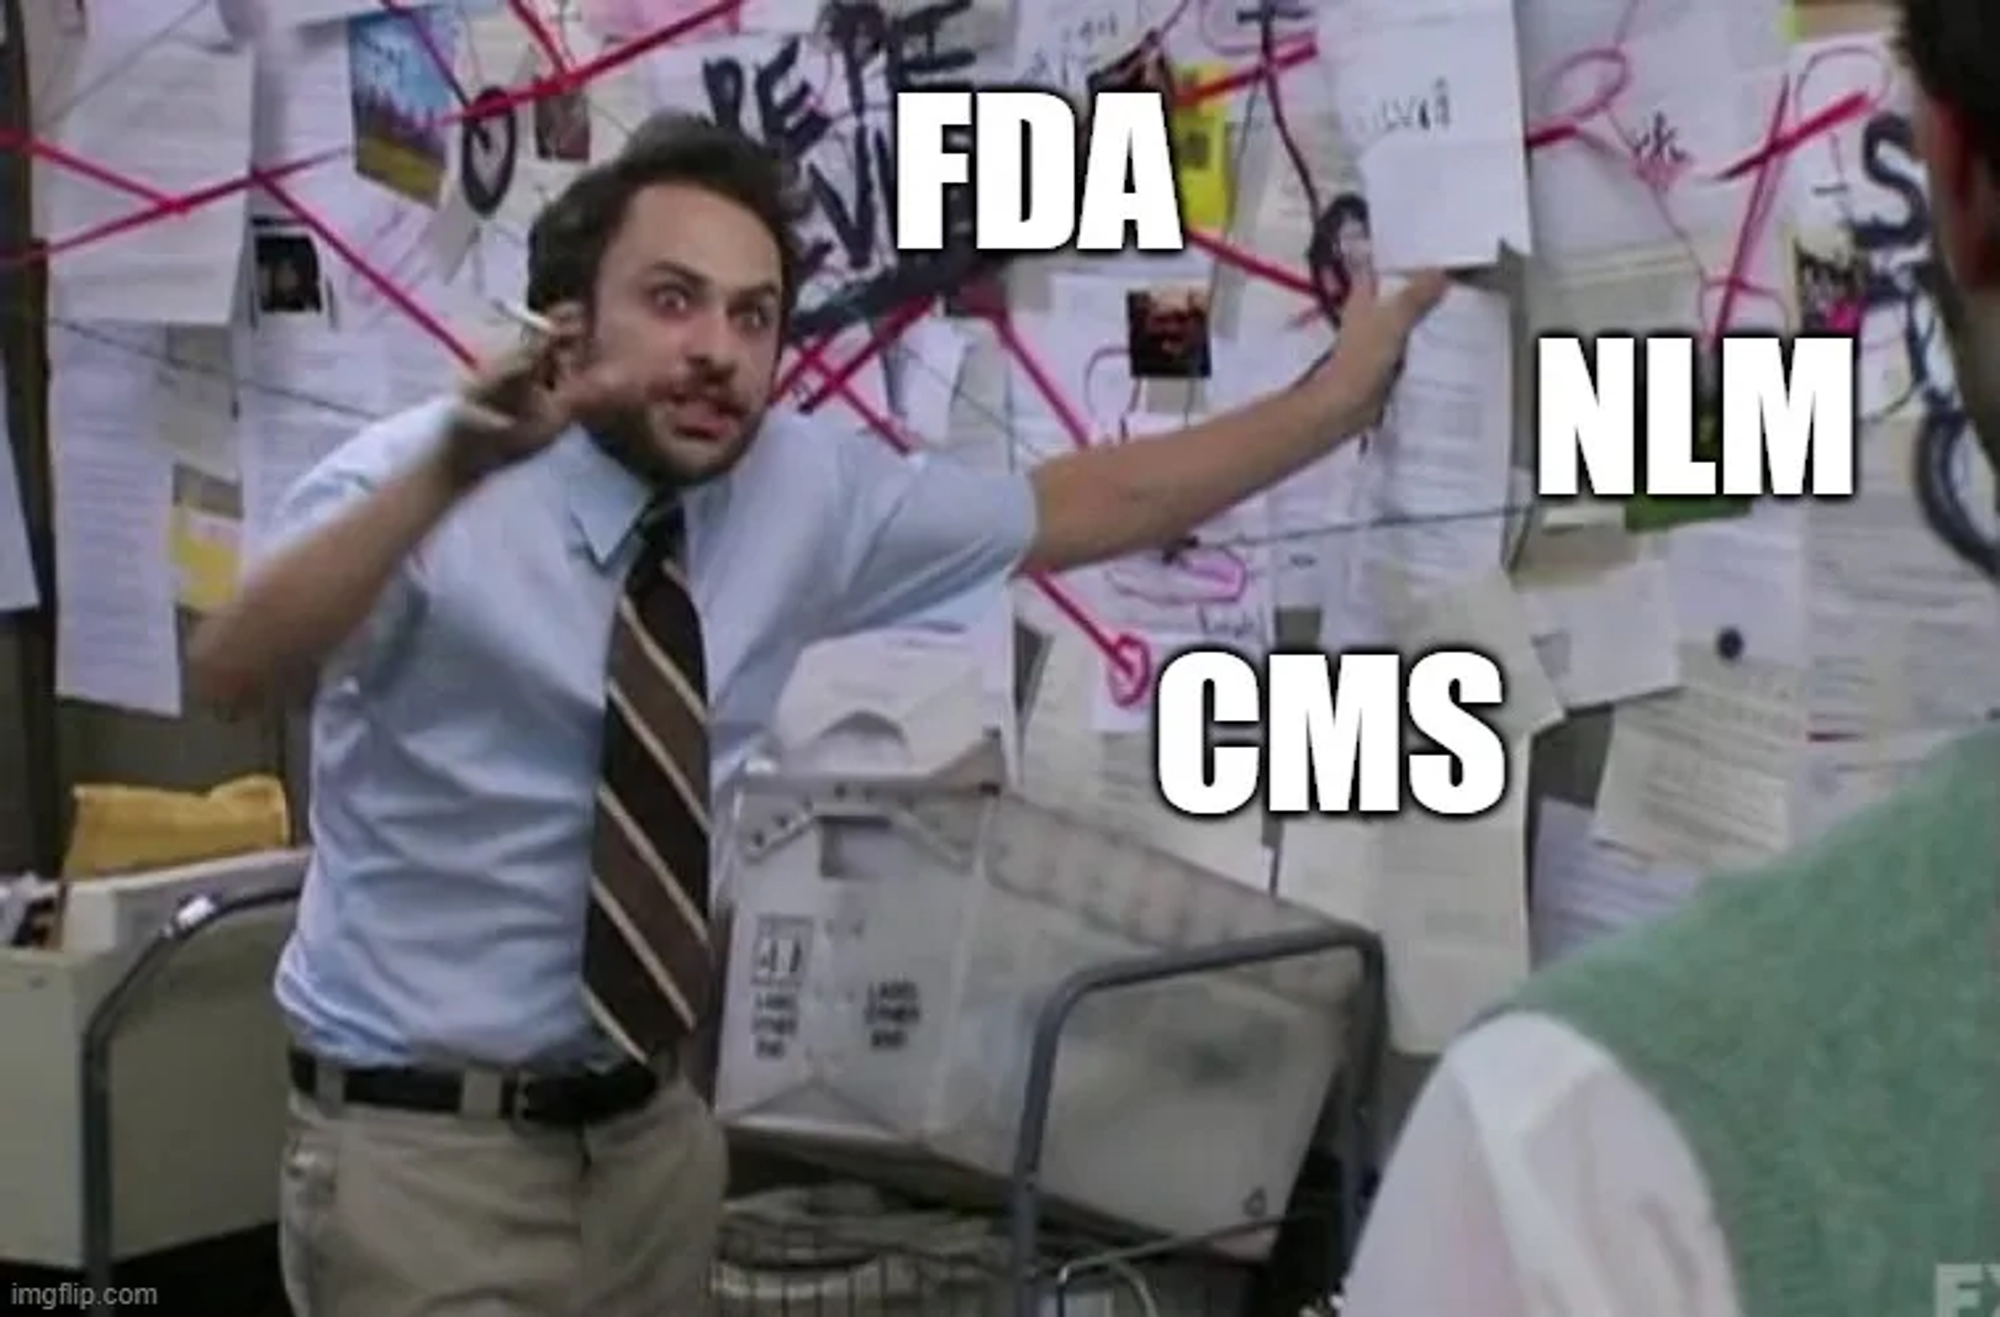 An actual image of me trying to explain how to manually combine open drug data from different sources.